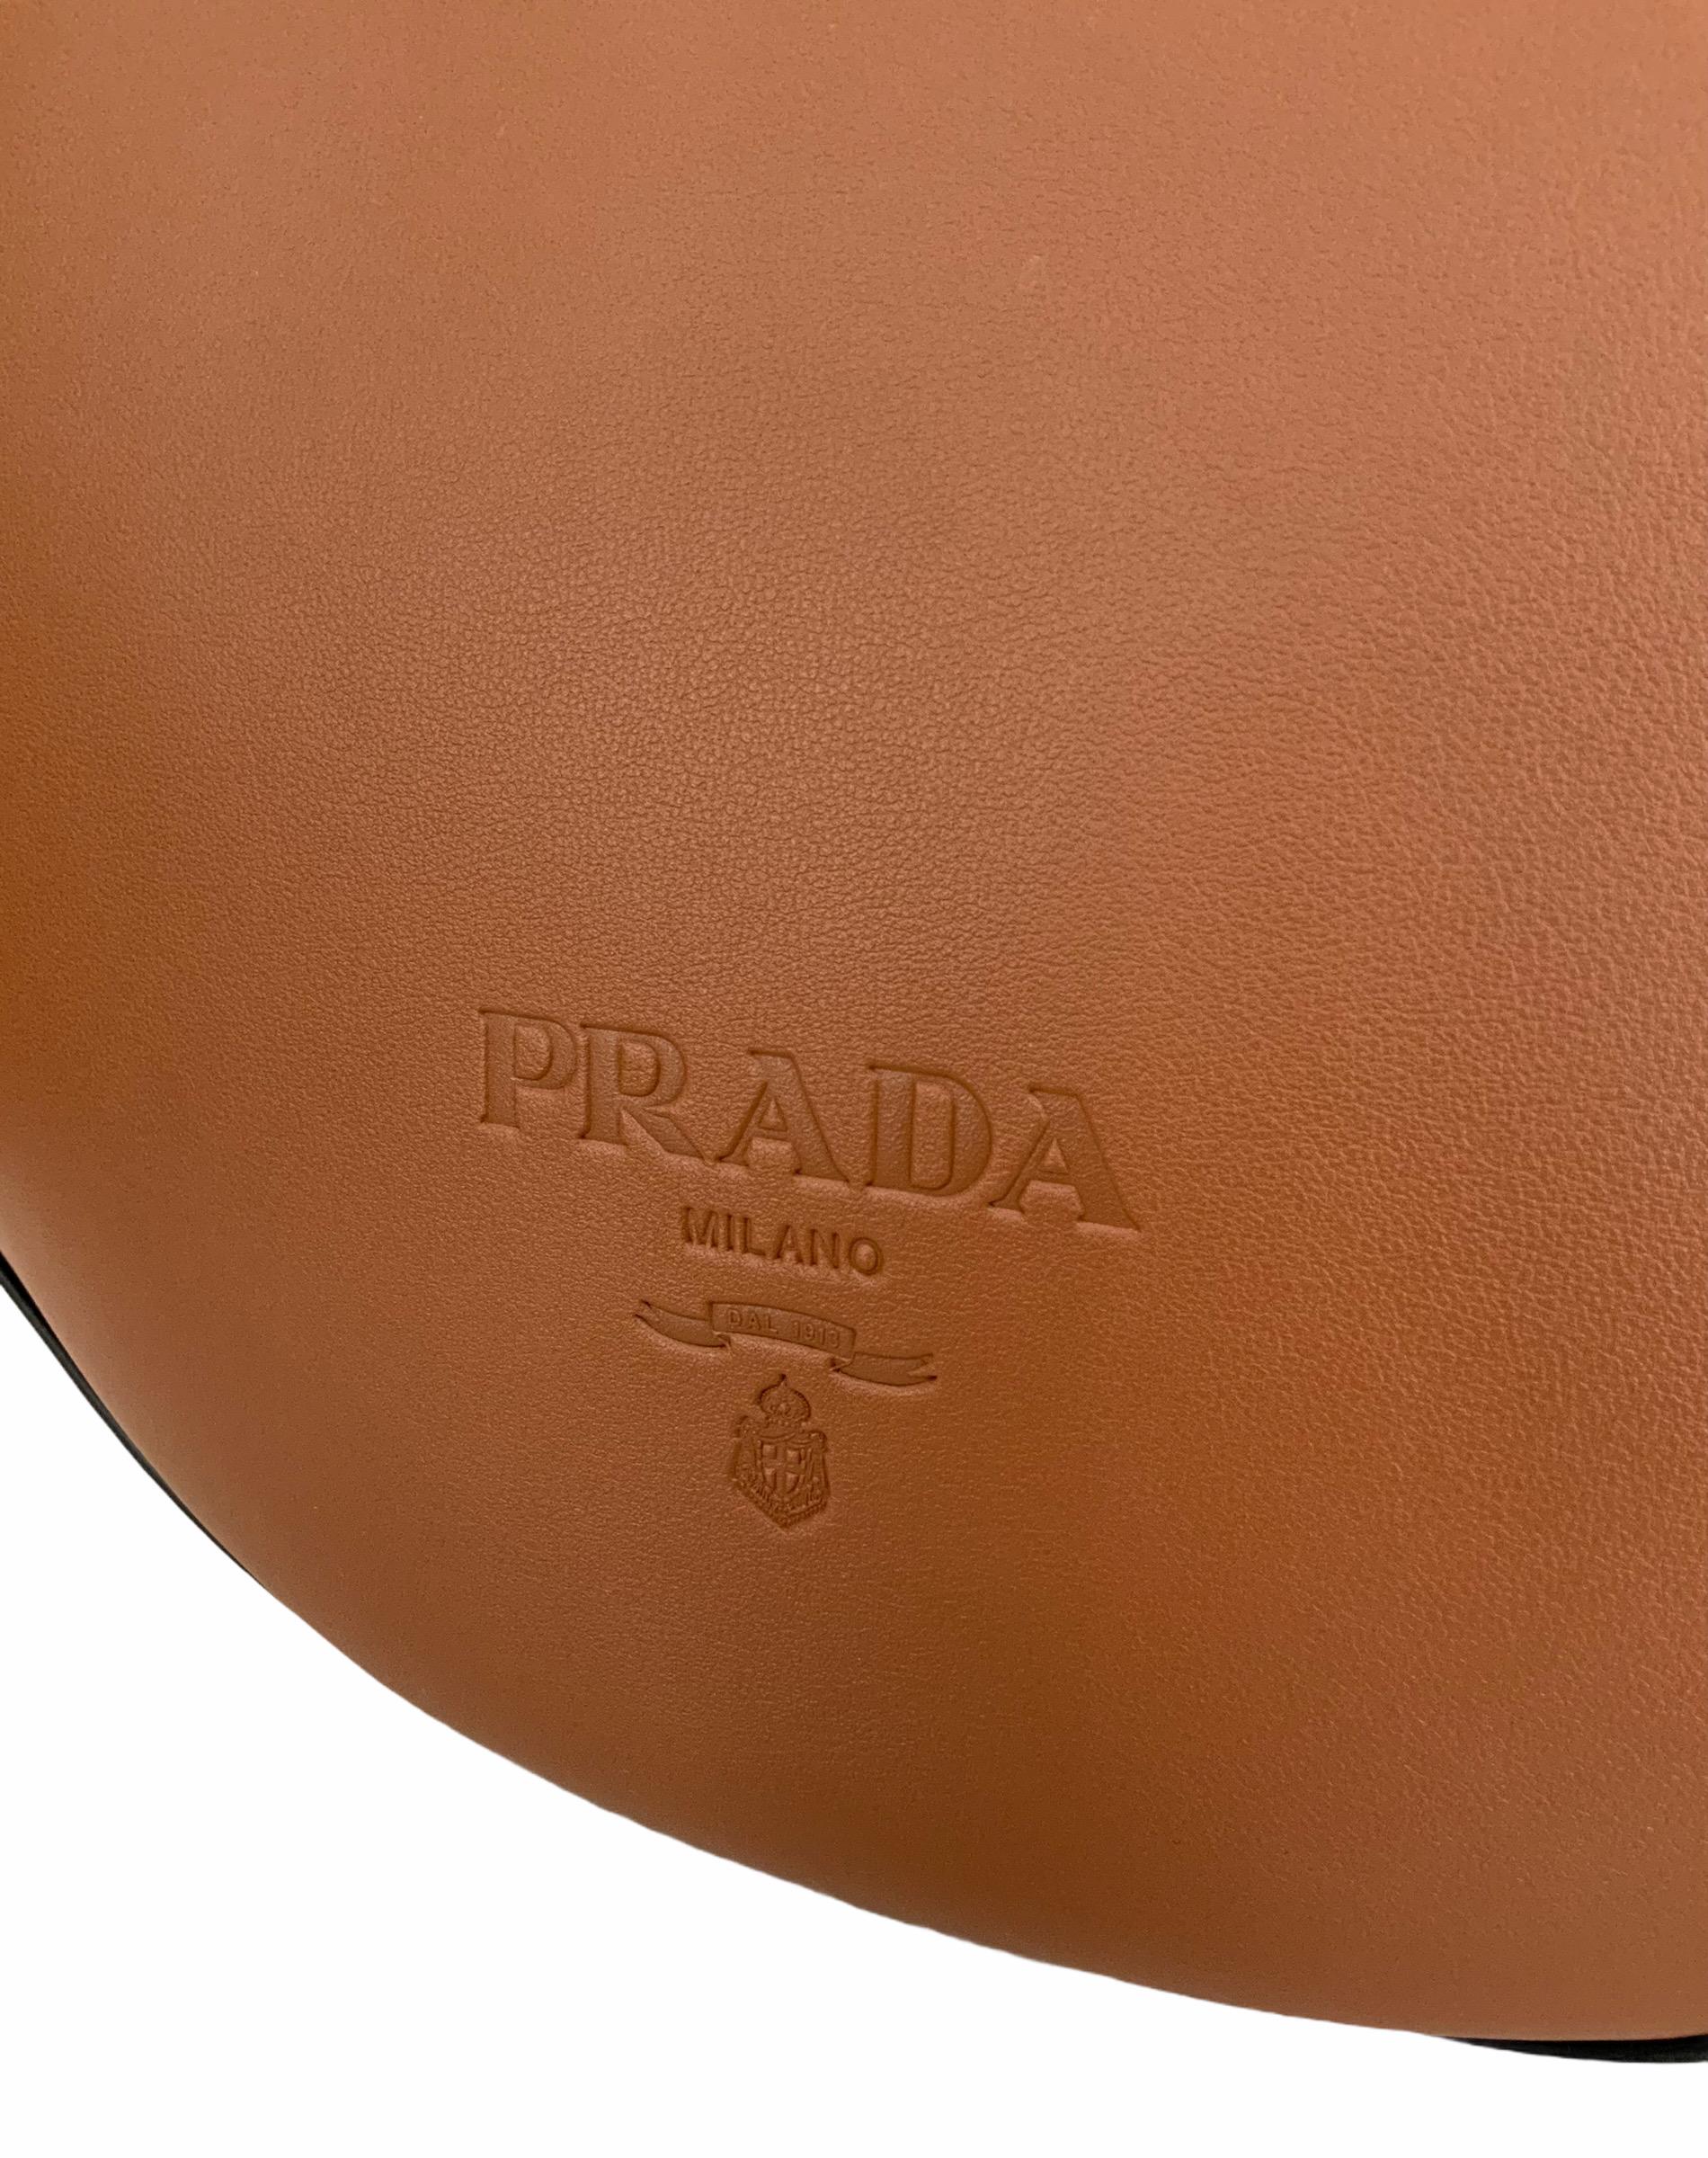 Prada Cognac Leather Bag with Cord Details In Excellent Condition In Geneva, CH